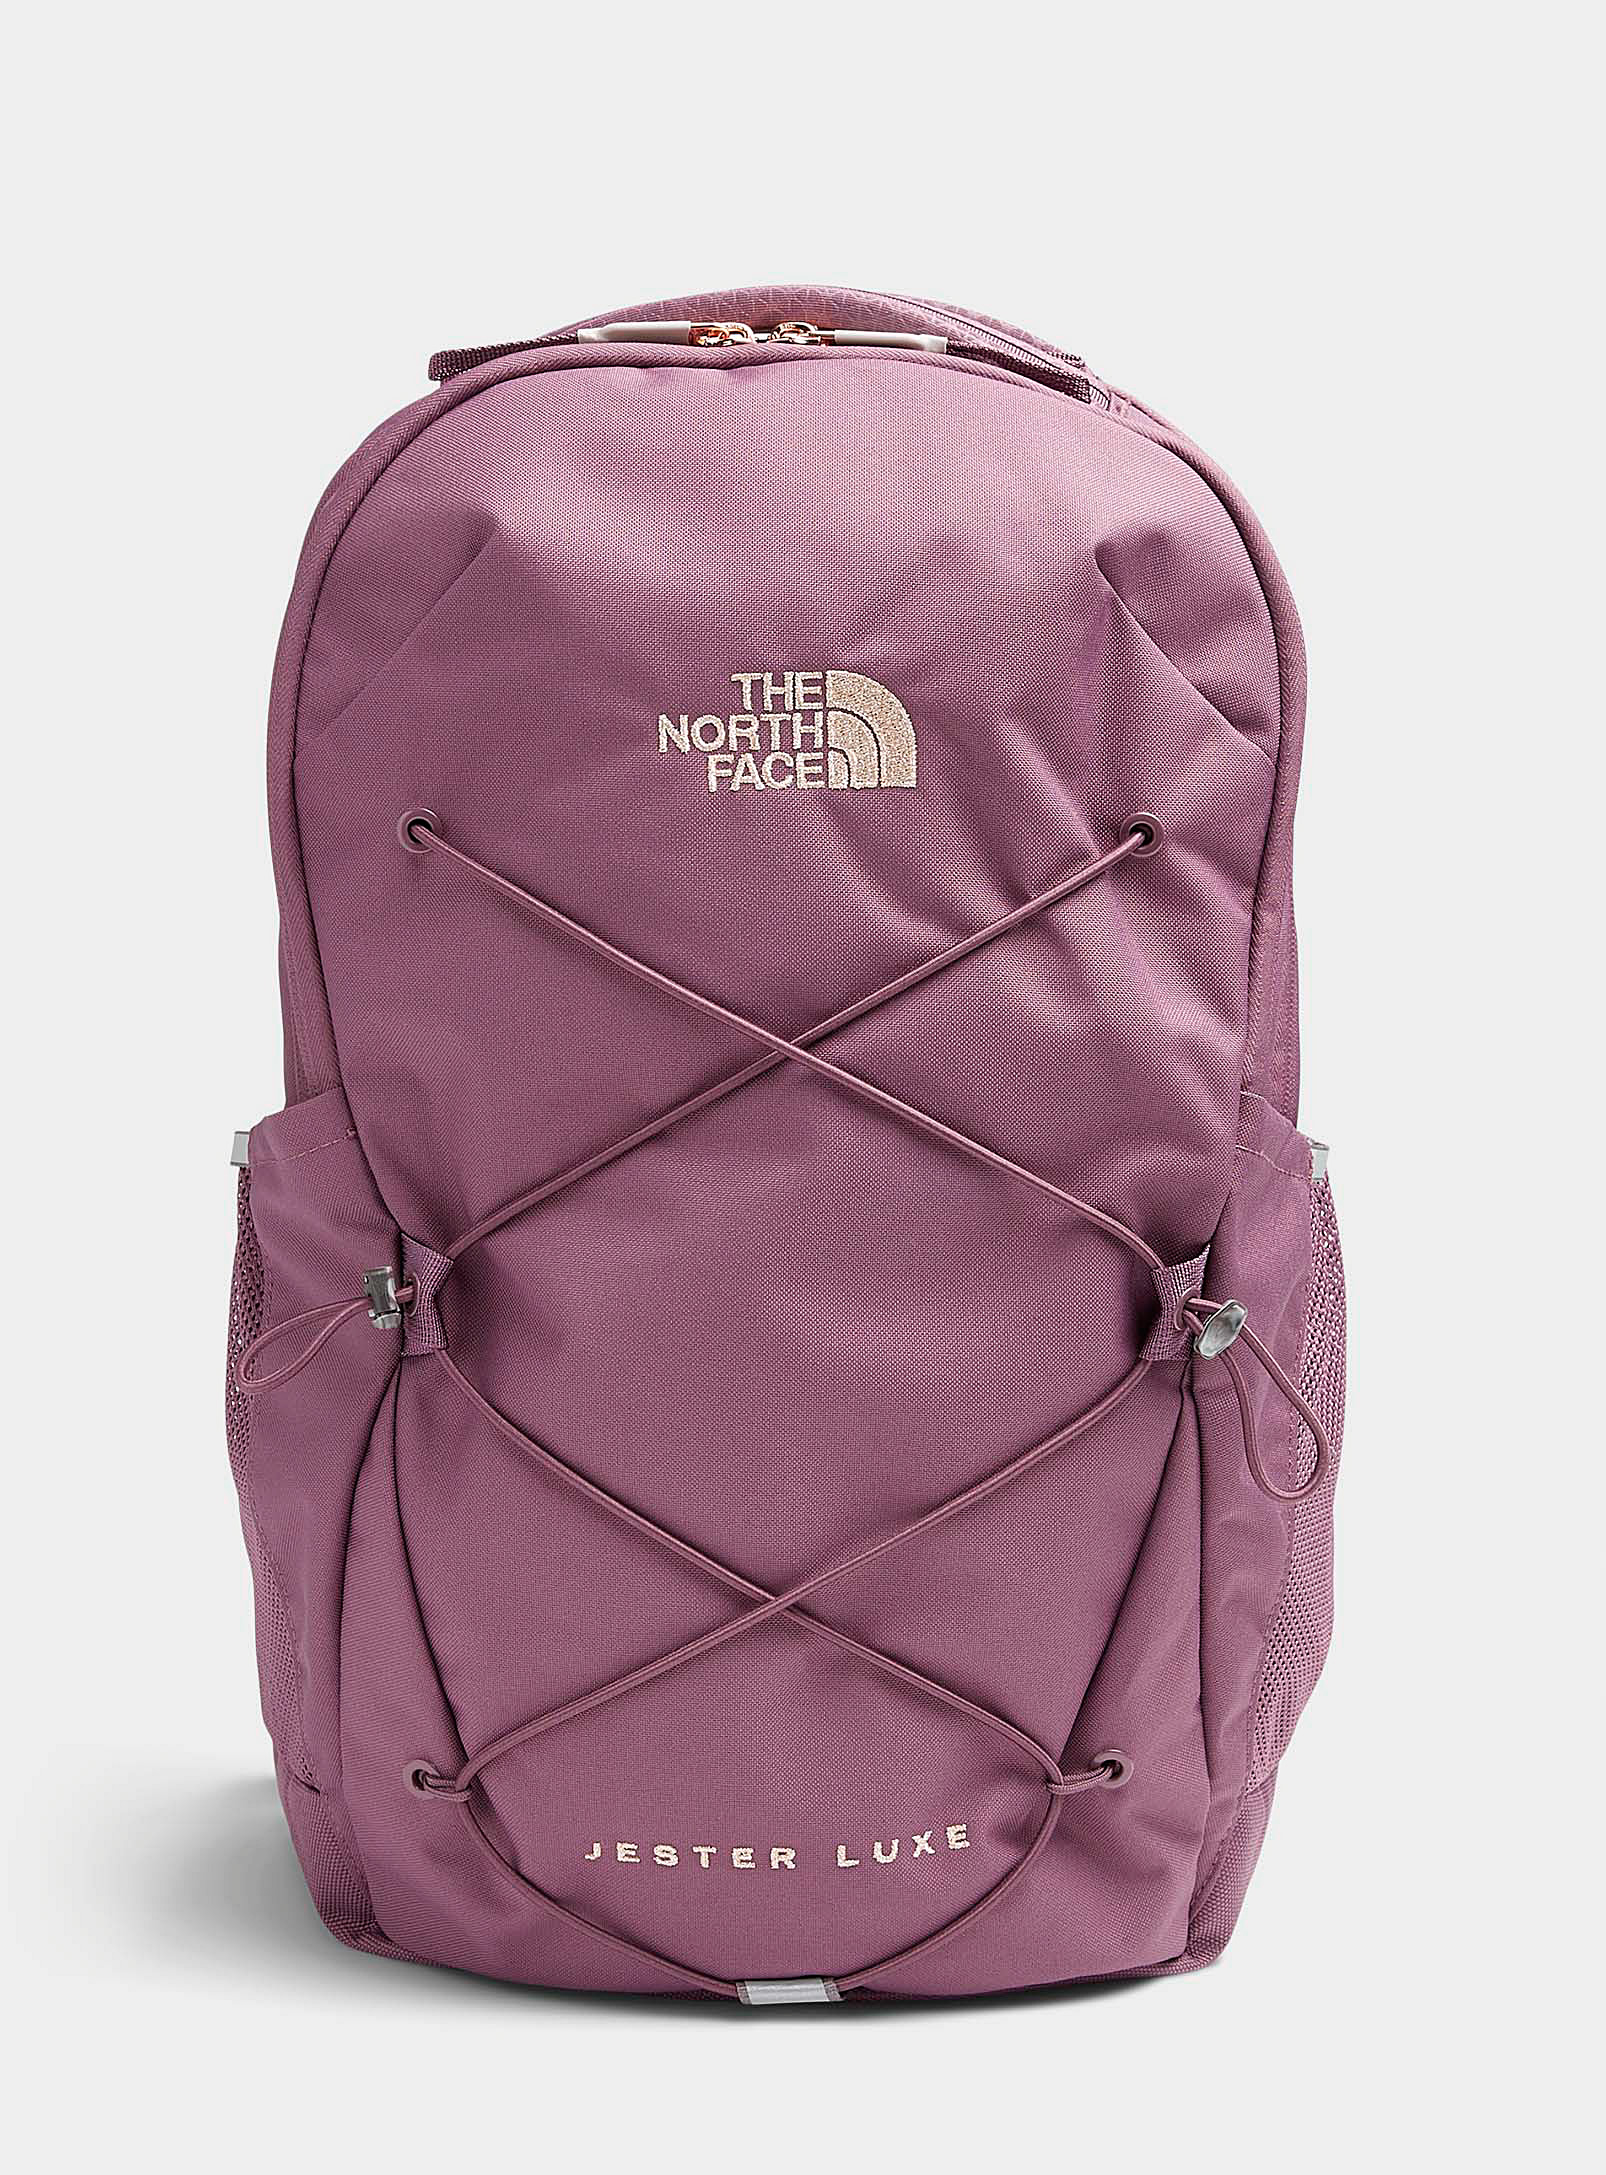 The North Face Jester Luxe Backpack In Purple